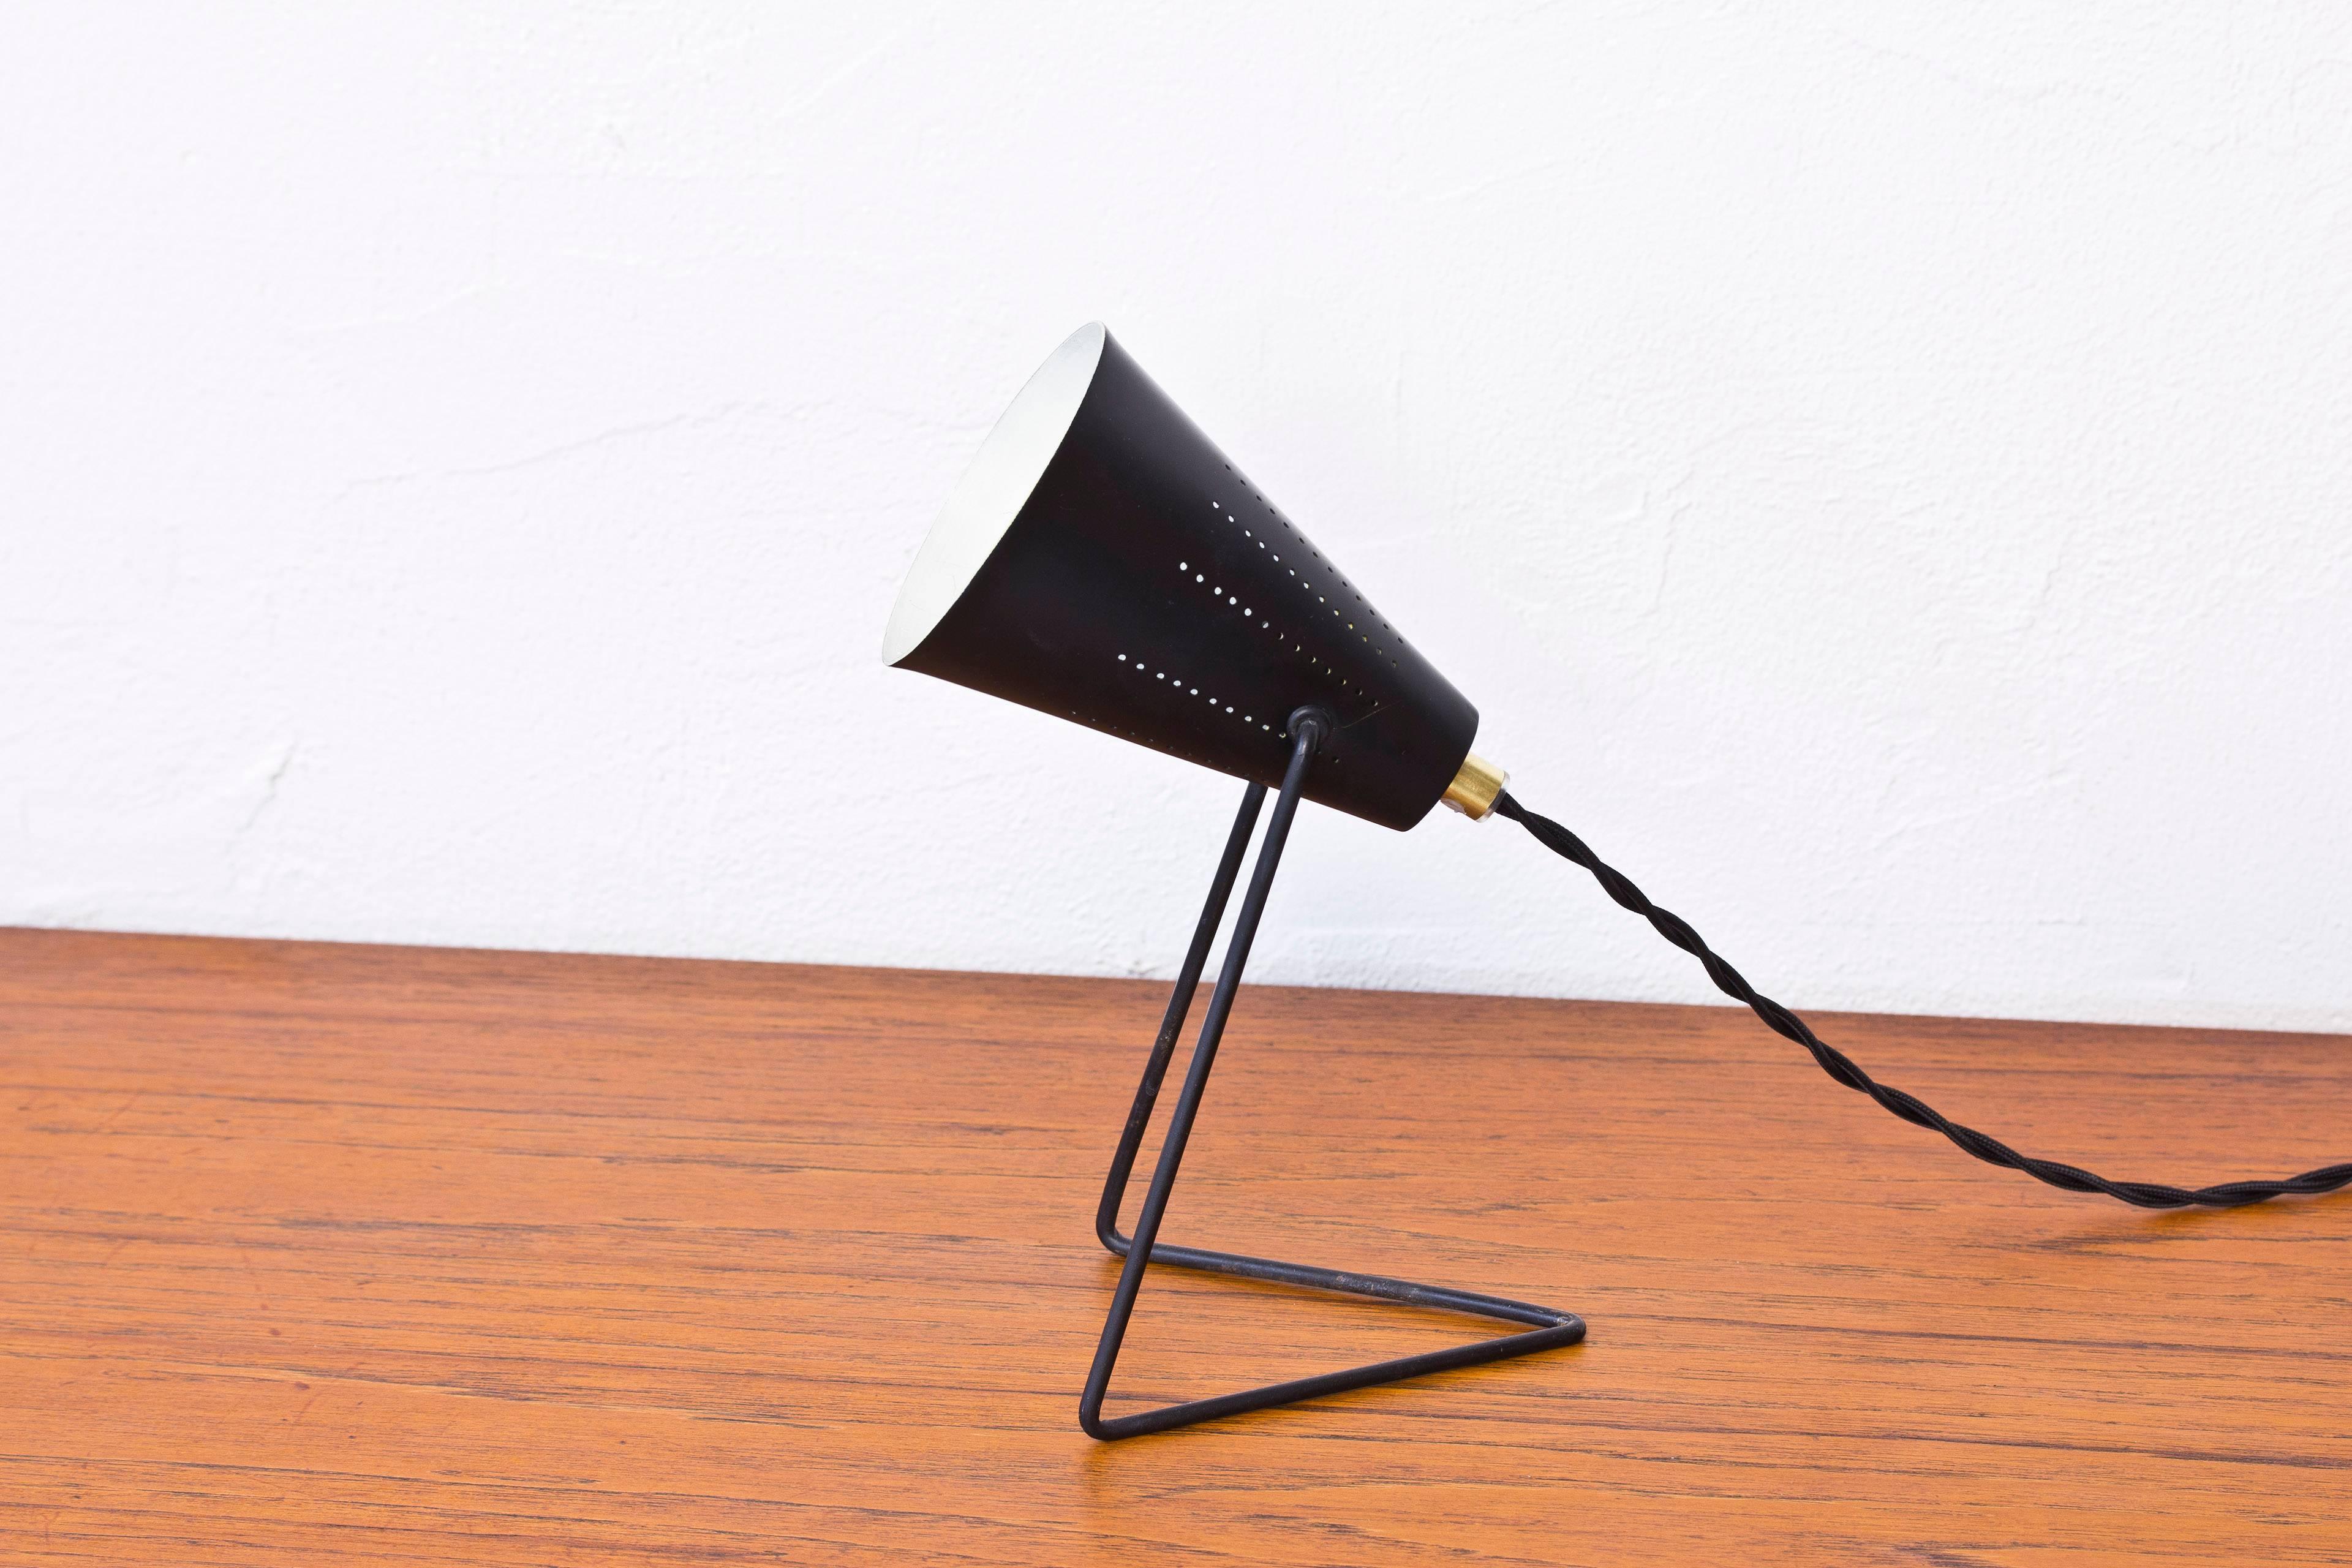 Scandinavian Modern Wall or Table Lamp Attributed to Svend Aage Holm Sørensen